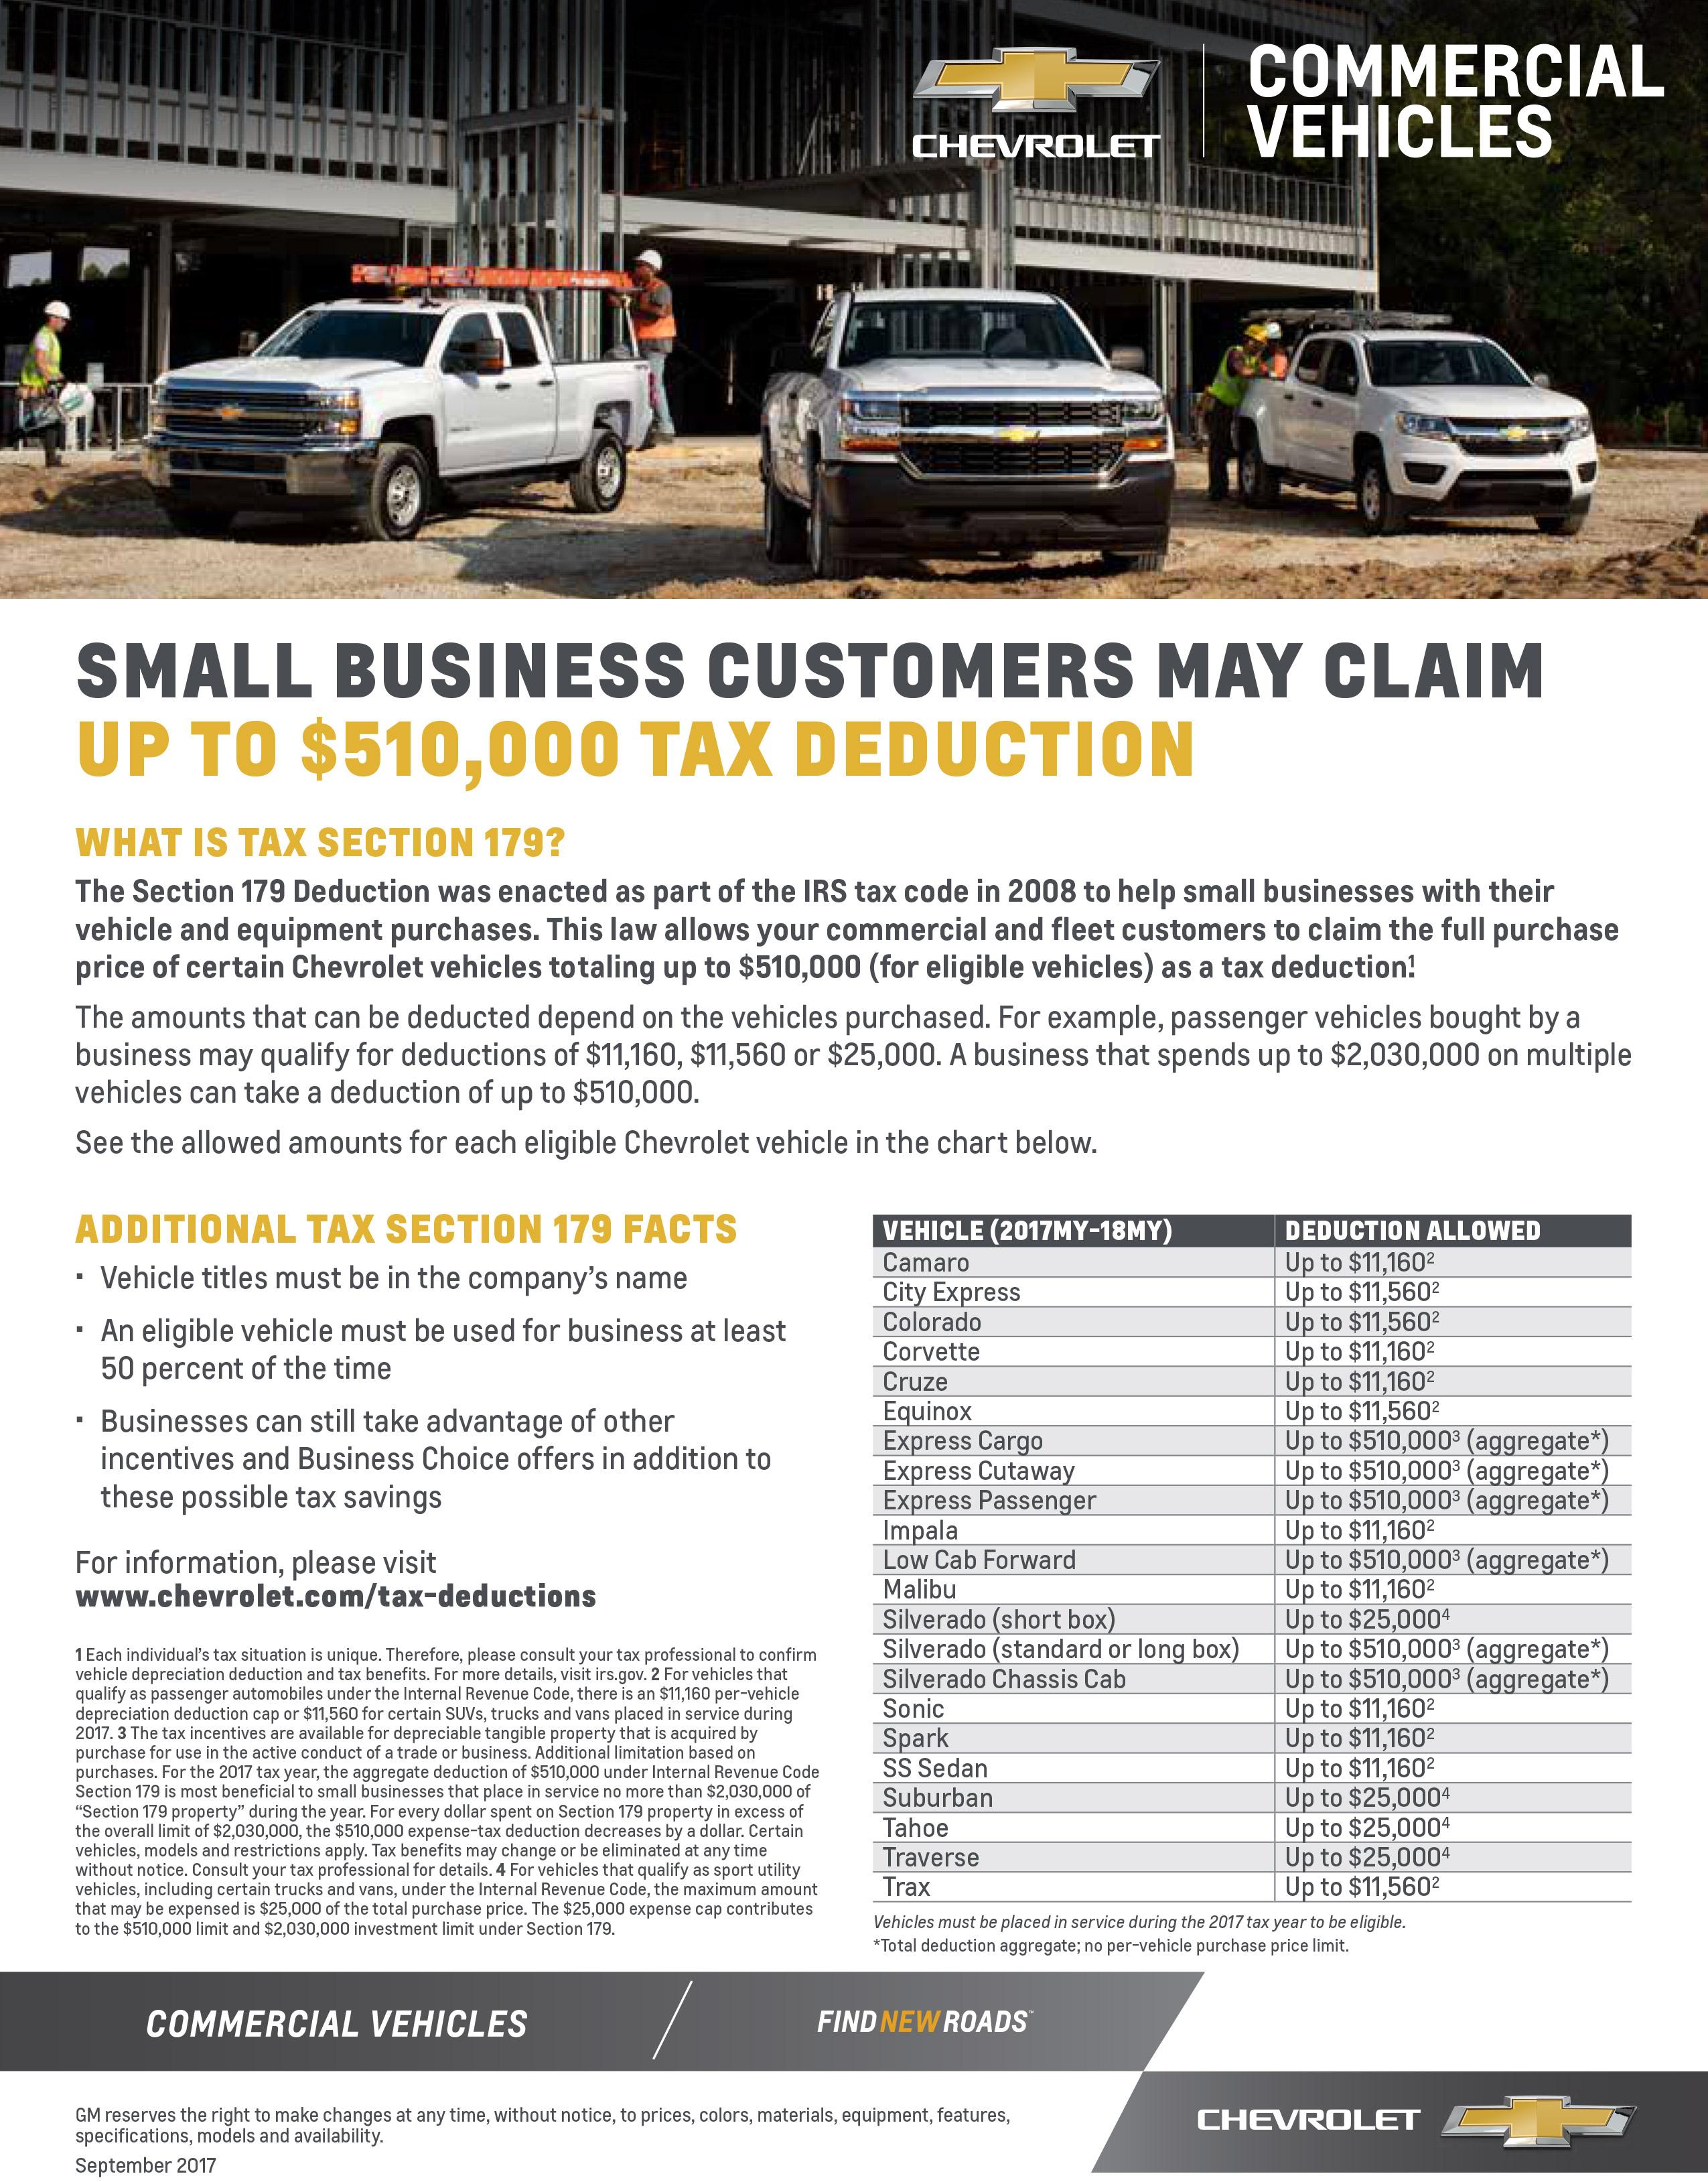 tax-deduction-on-chevy-commercial-vehicles-seacoast-chevrolet